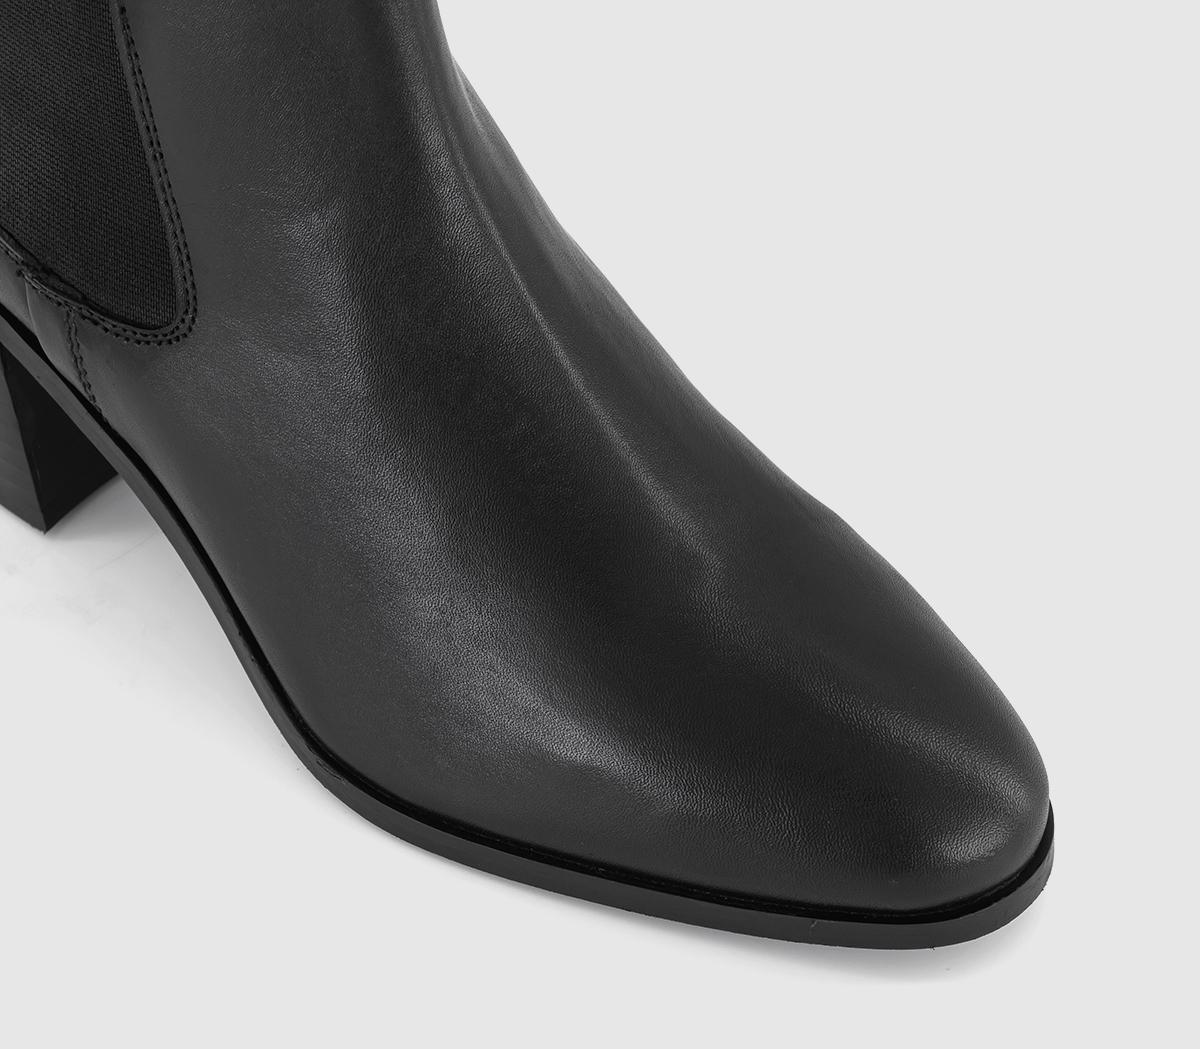 OFFICE Aspect Block Heel Chelsea Boots Black Leather - Women's Ankle Boots